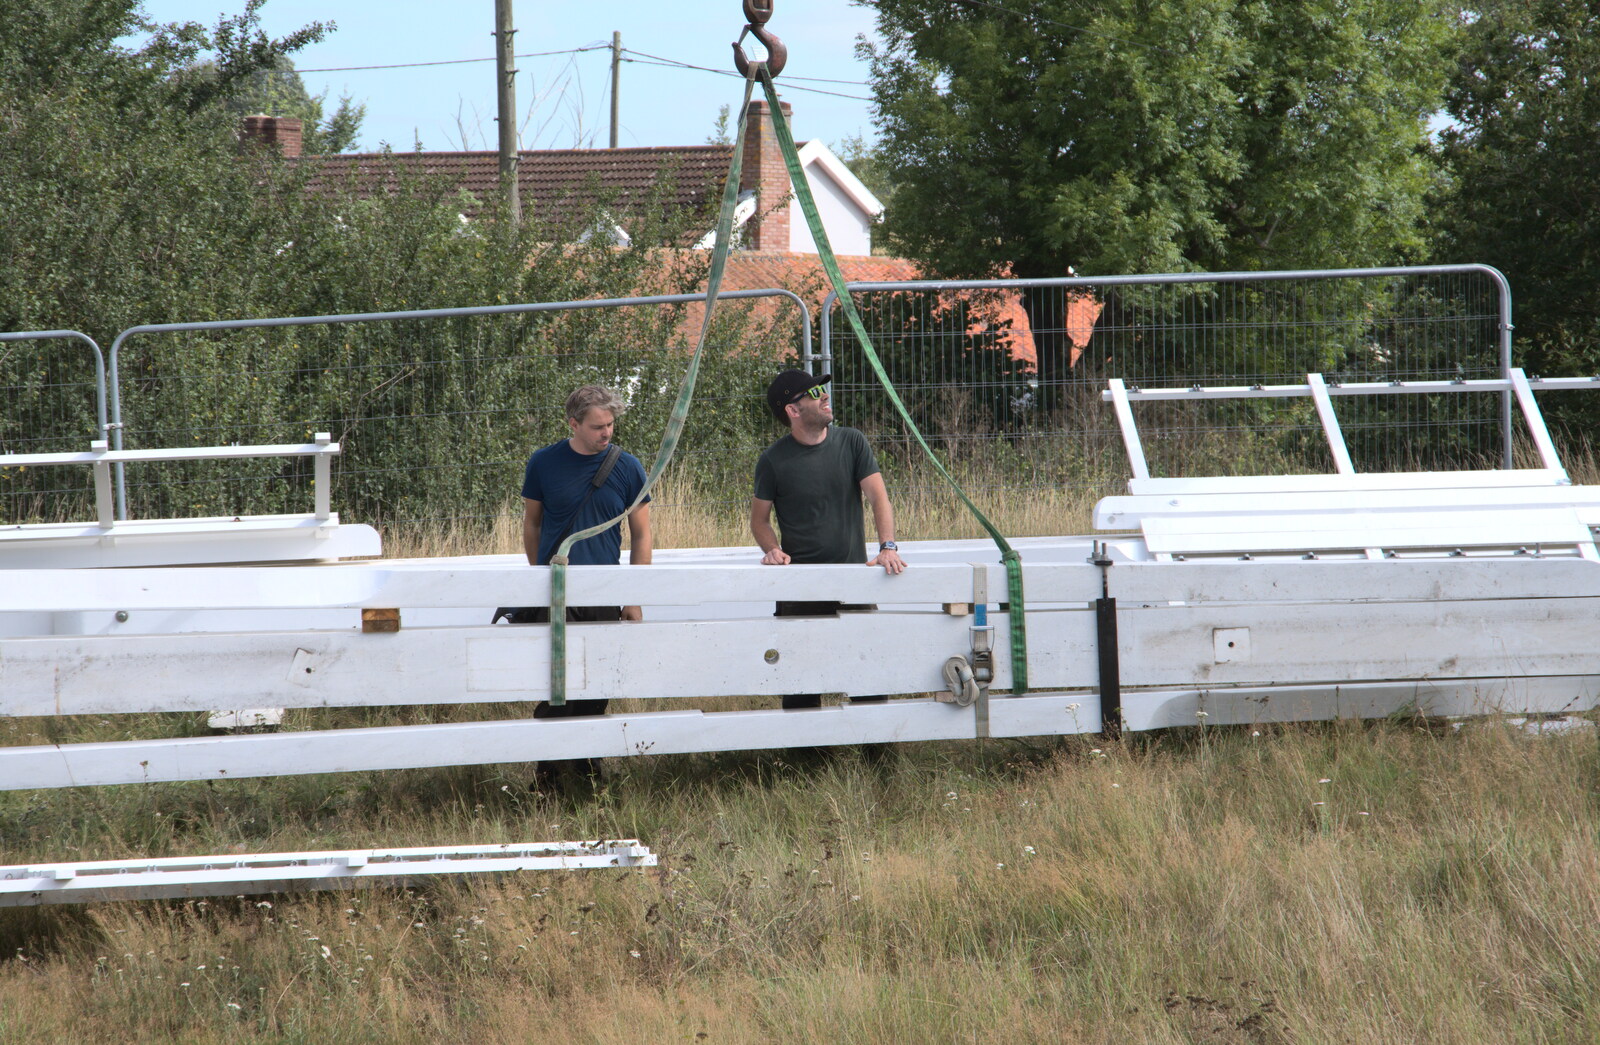 The two-ton arm is lifted from A Sail Fitting, Billingford Windmill, Billingford, Norfolk - 20th August 2020